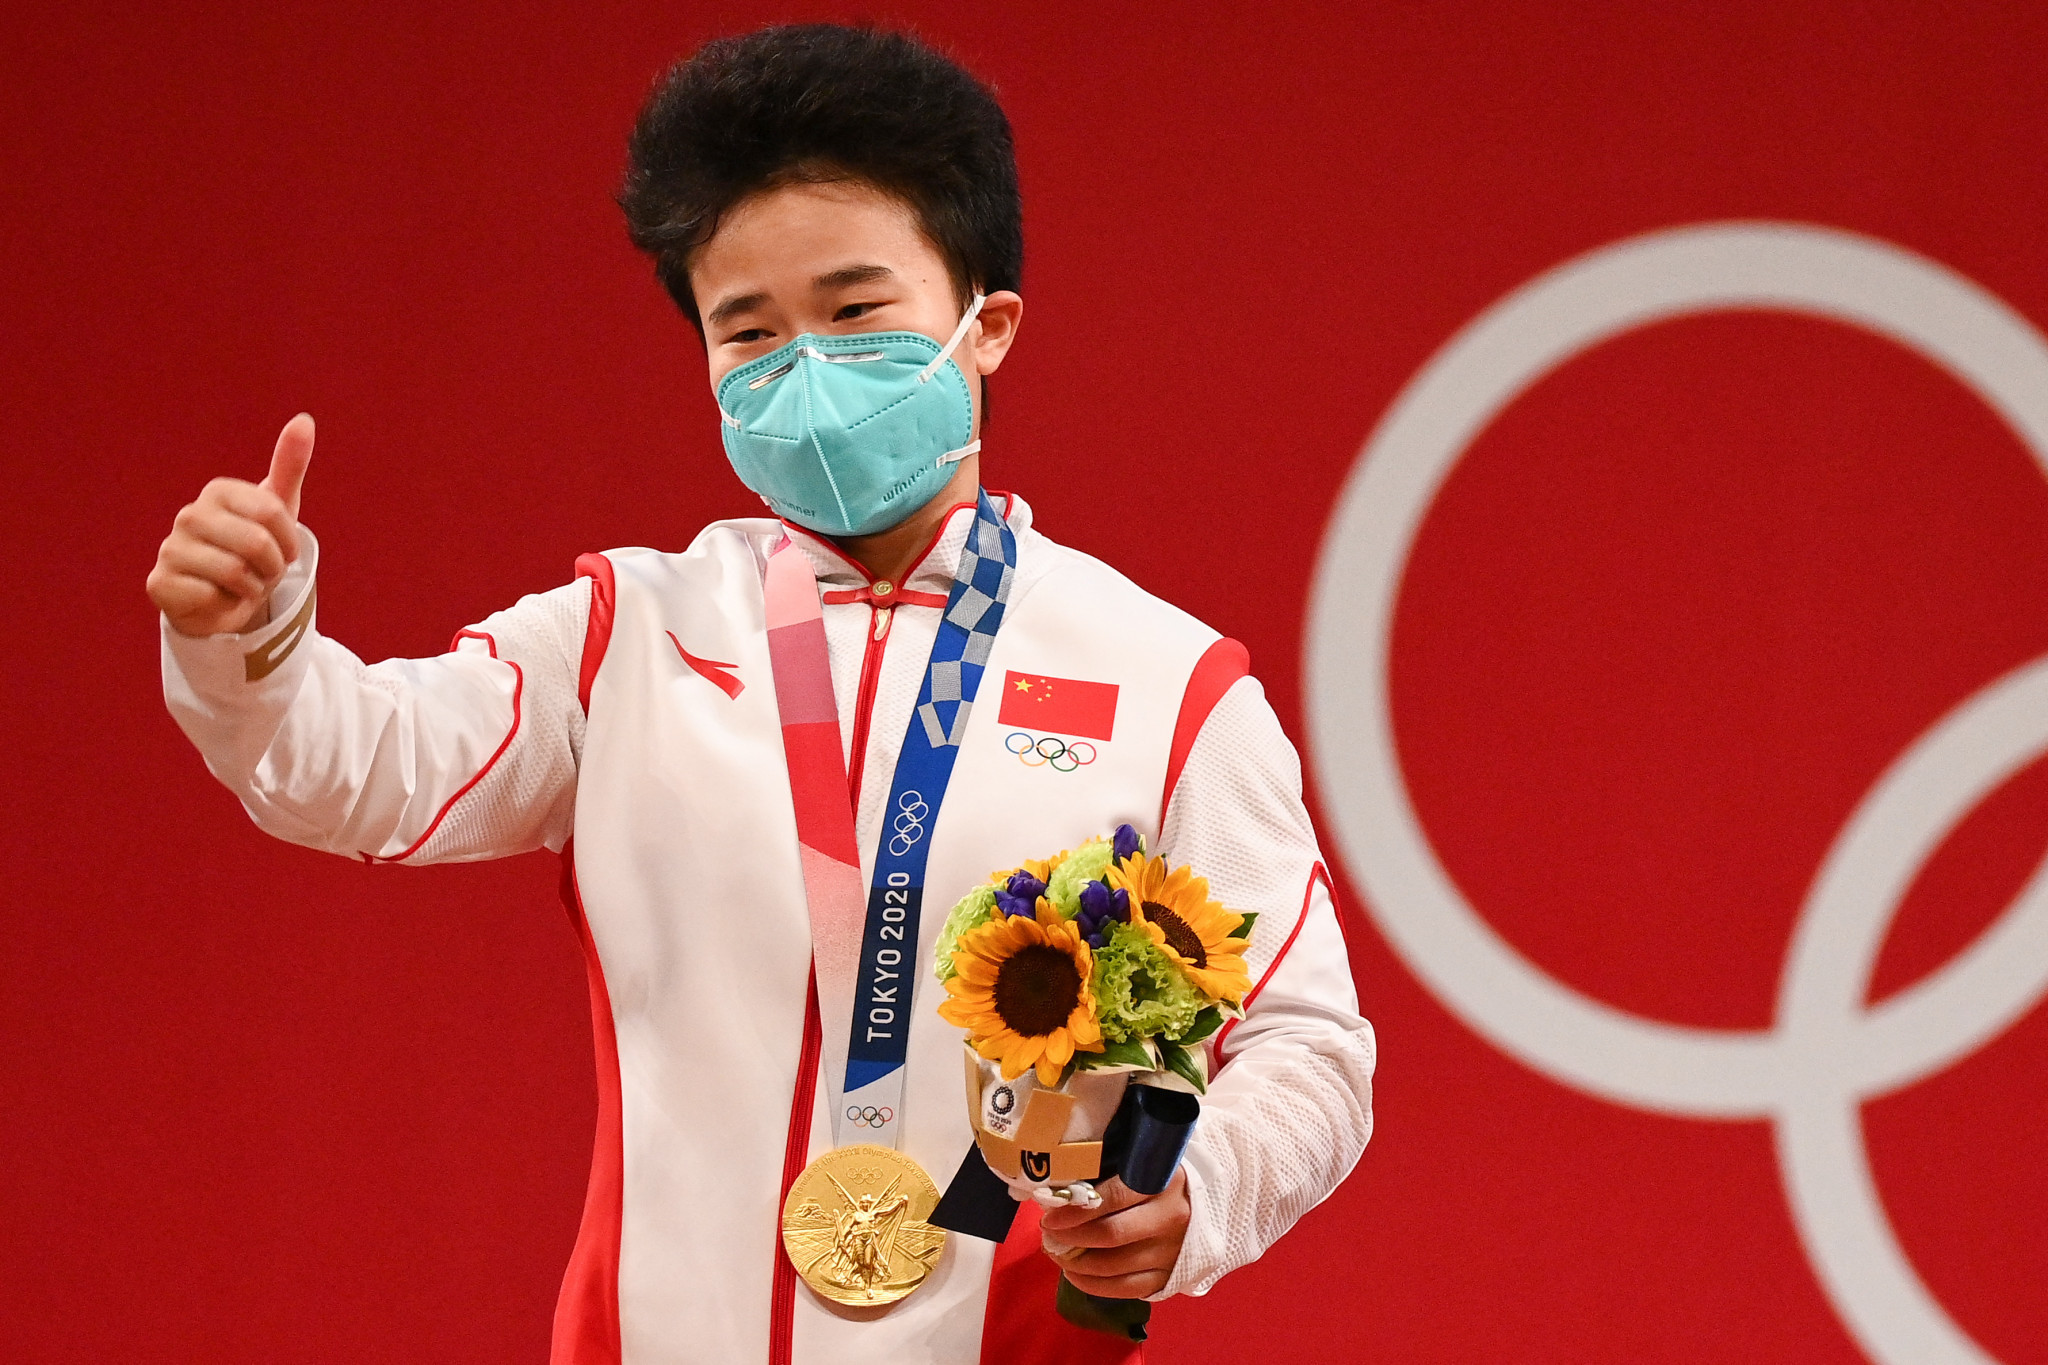 There is no truth to reports that Hou Zhihui was asked to take an extra anti-doping test in Tokyo ©Getty Images